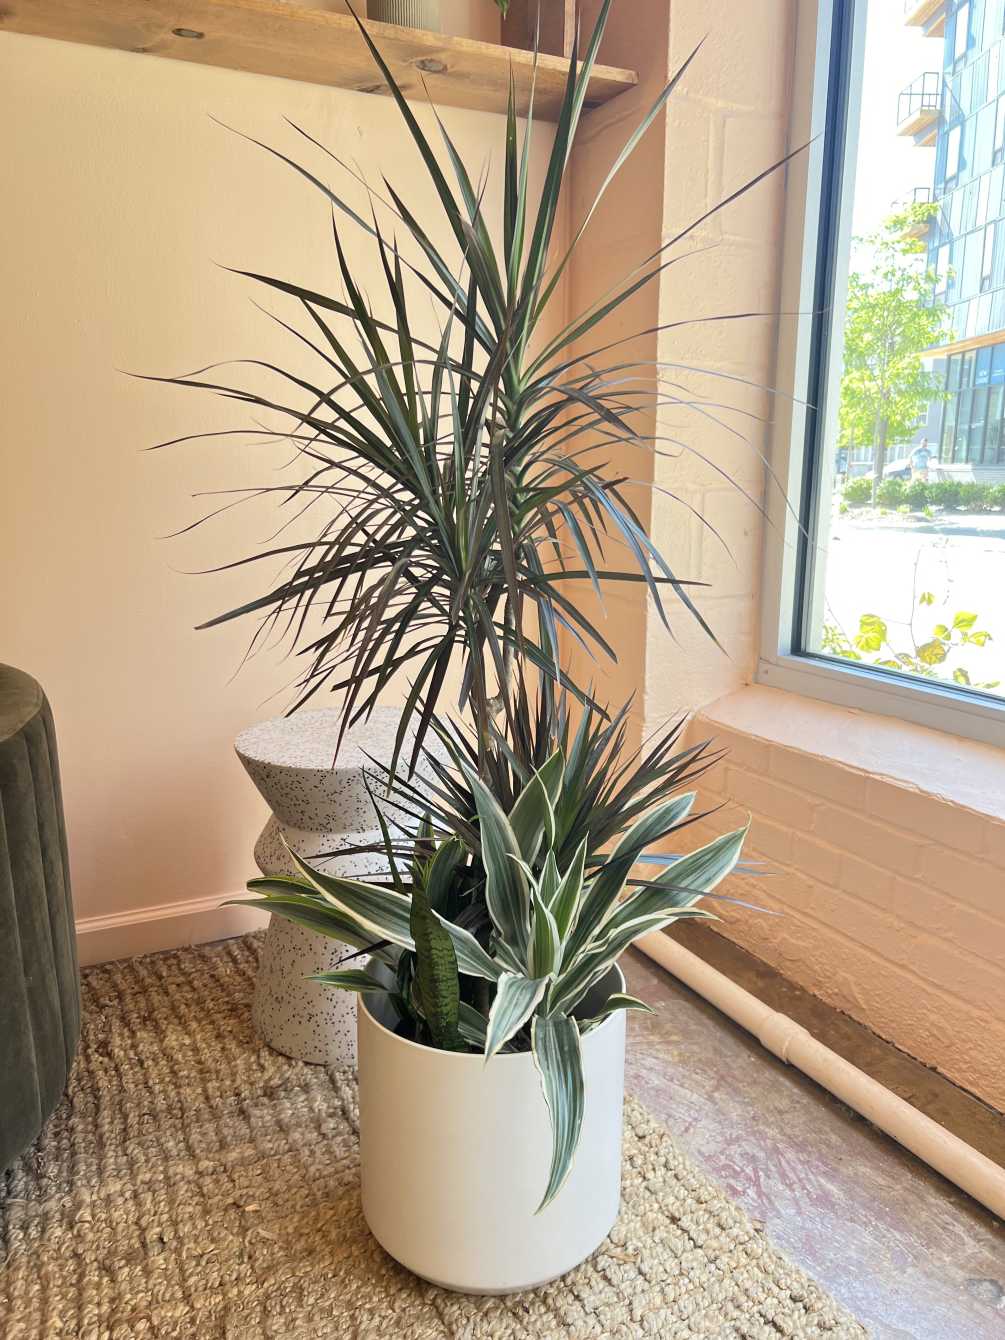 This beautiful floor plant features a staggered cane dracaena planted with other